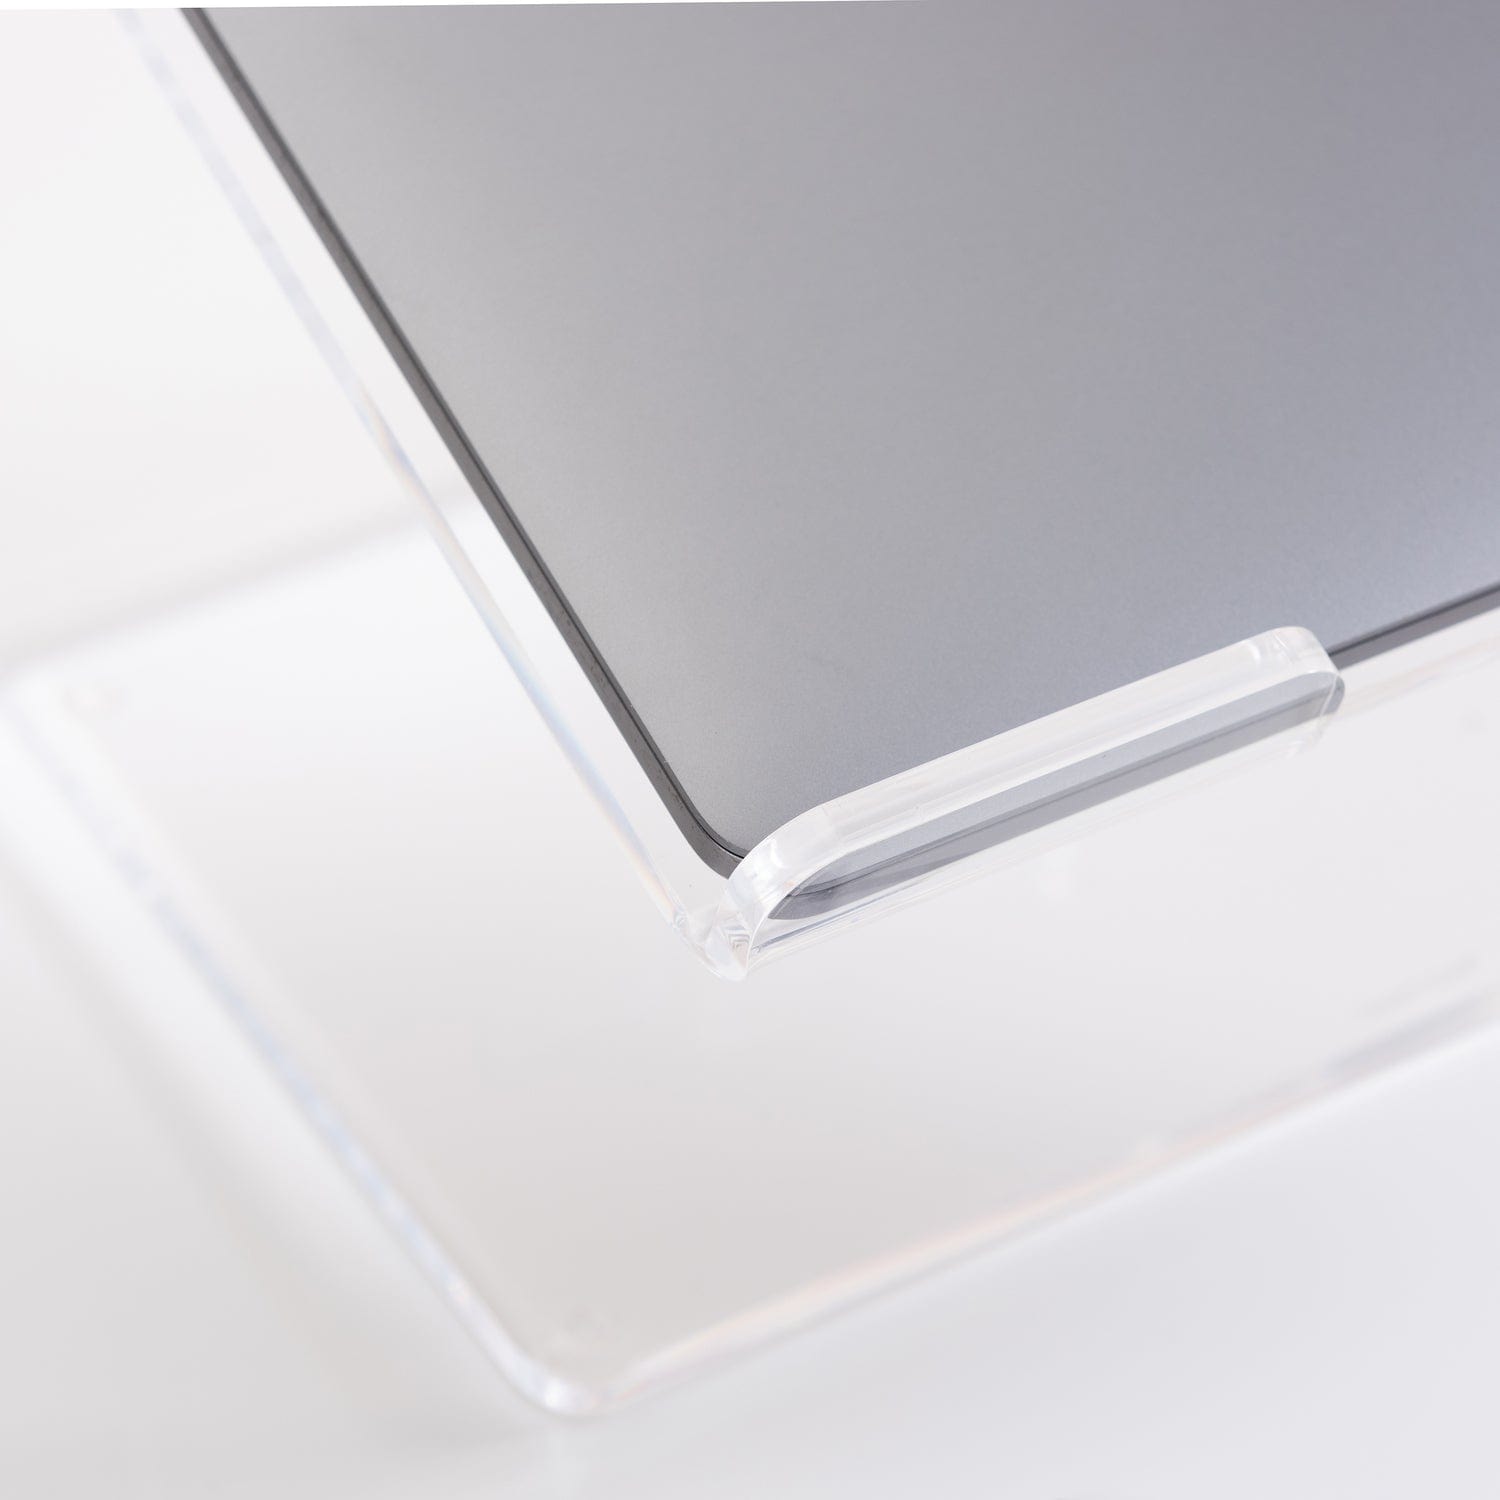 Clear Acrylic Laptop Stand, 14 x 12.125 x 8.75, with Cable Management,  For Up to 16 Laptops (51183)